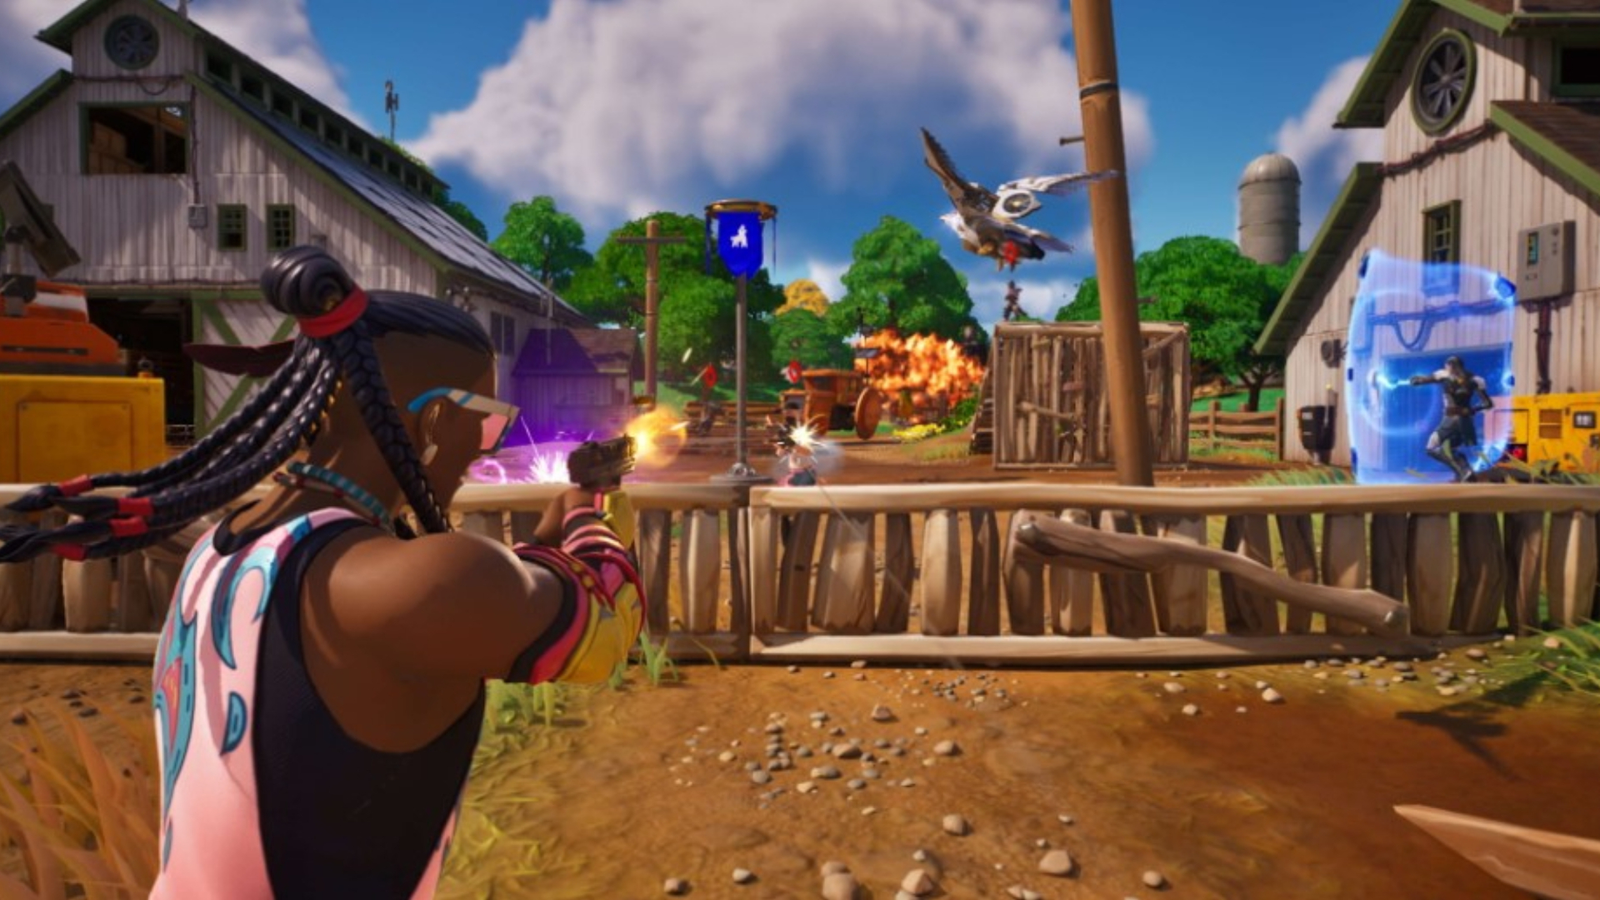 How to Optimize EpicGames Launcher to Increase the FPS in Fortnite New 3 